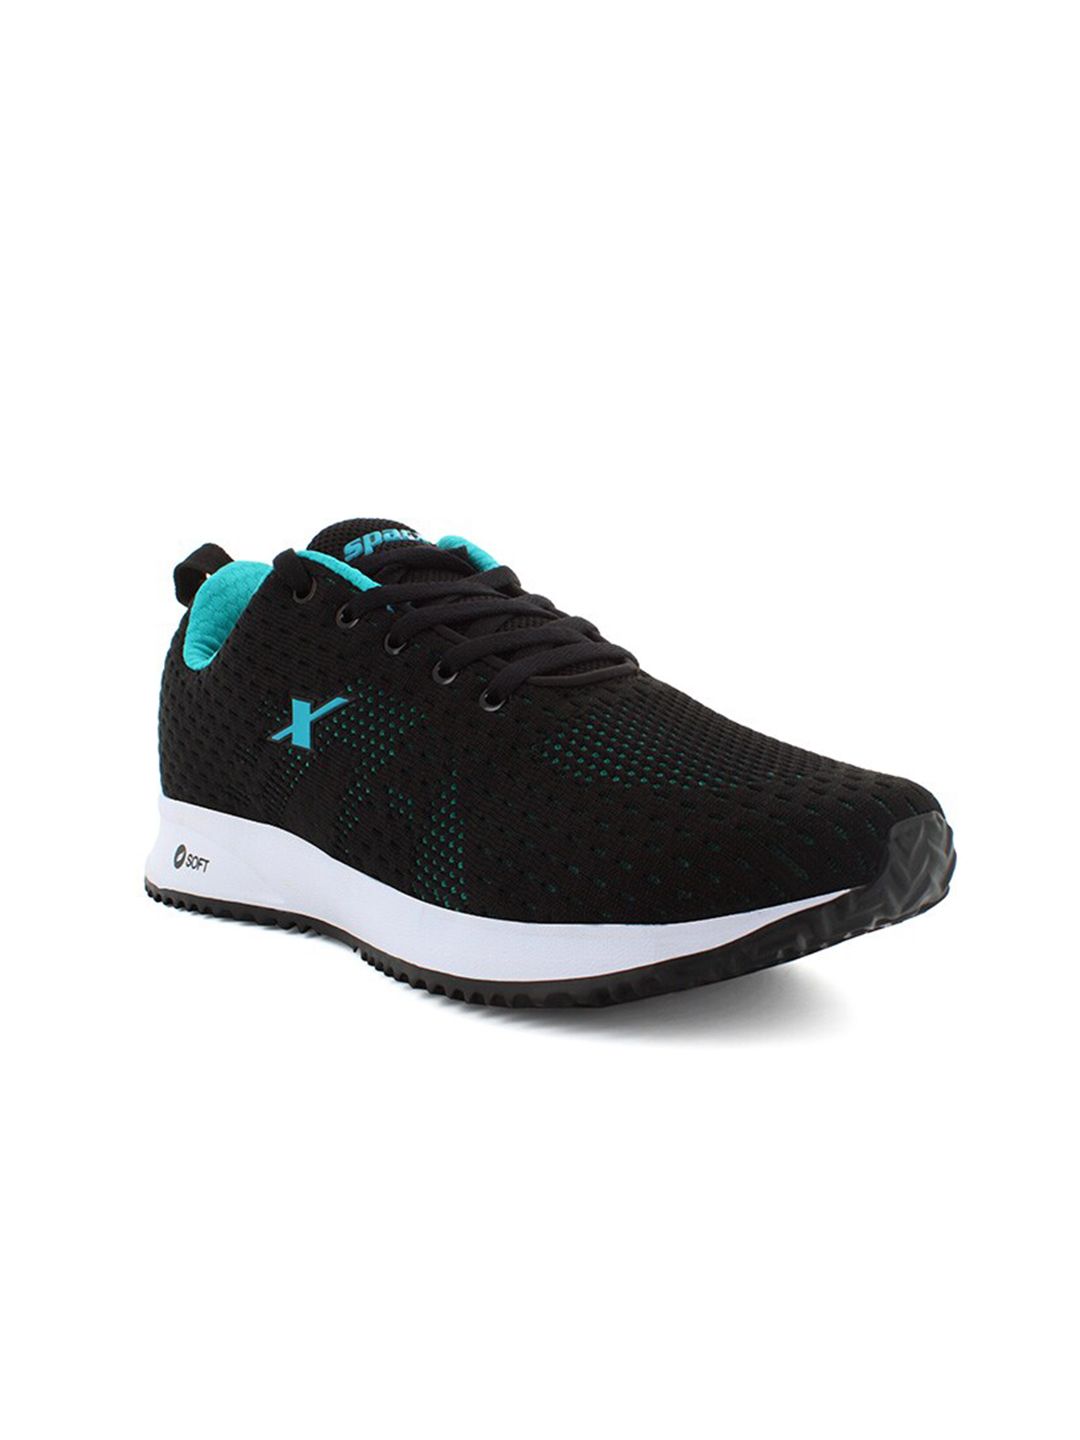 Sparx Women Black Textile Running Non-Marking Shoes Price in India